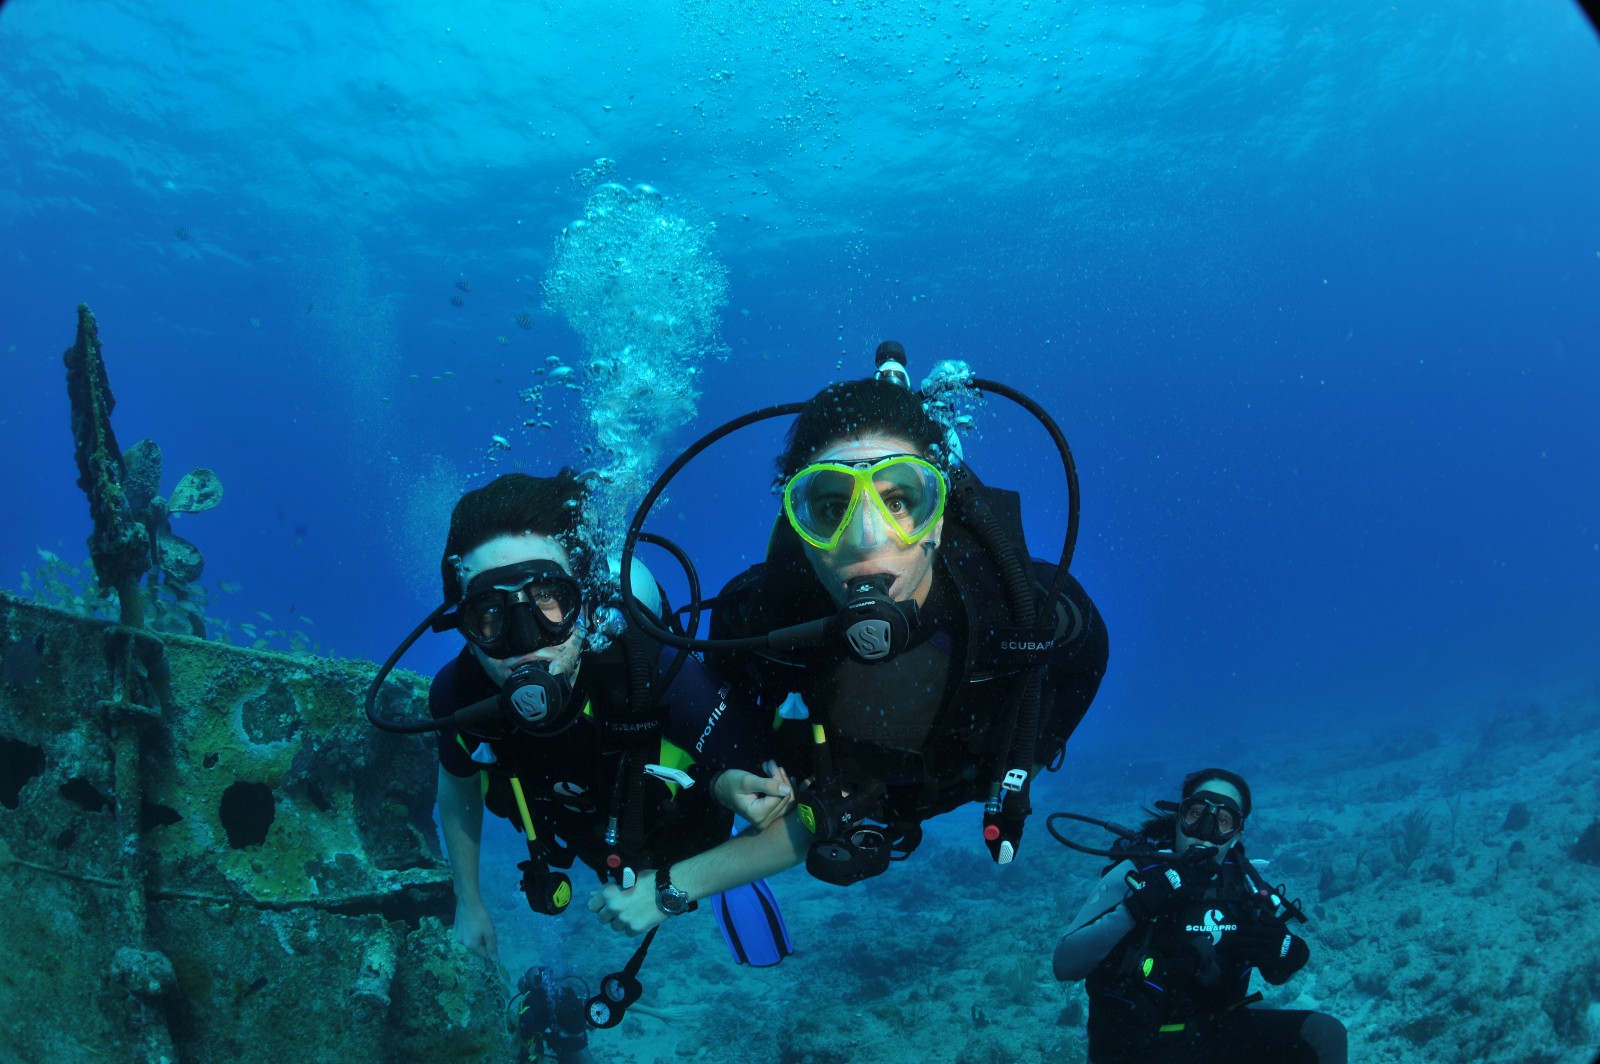 100 Feet Under the Sea « Diary of a Caribbean Med Student